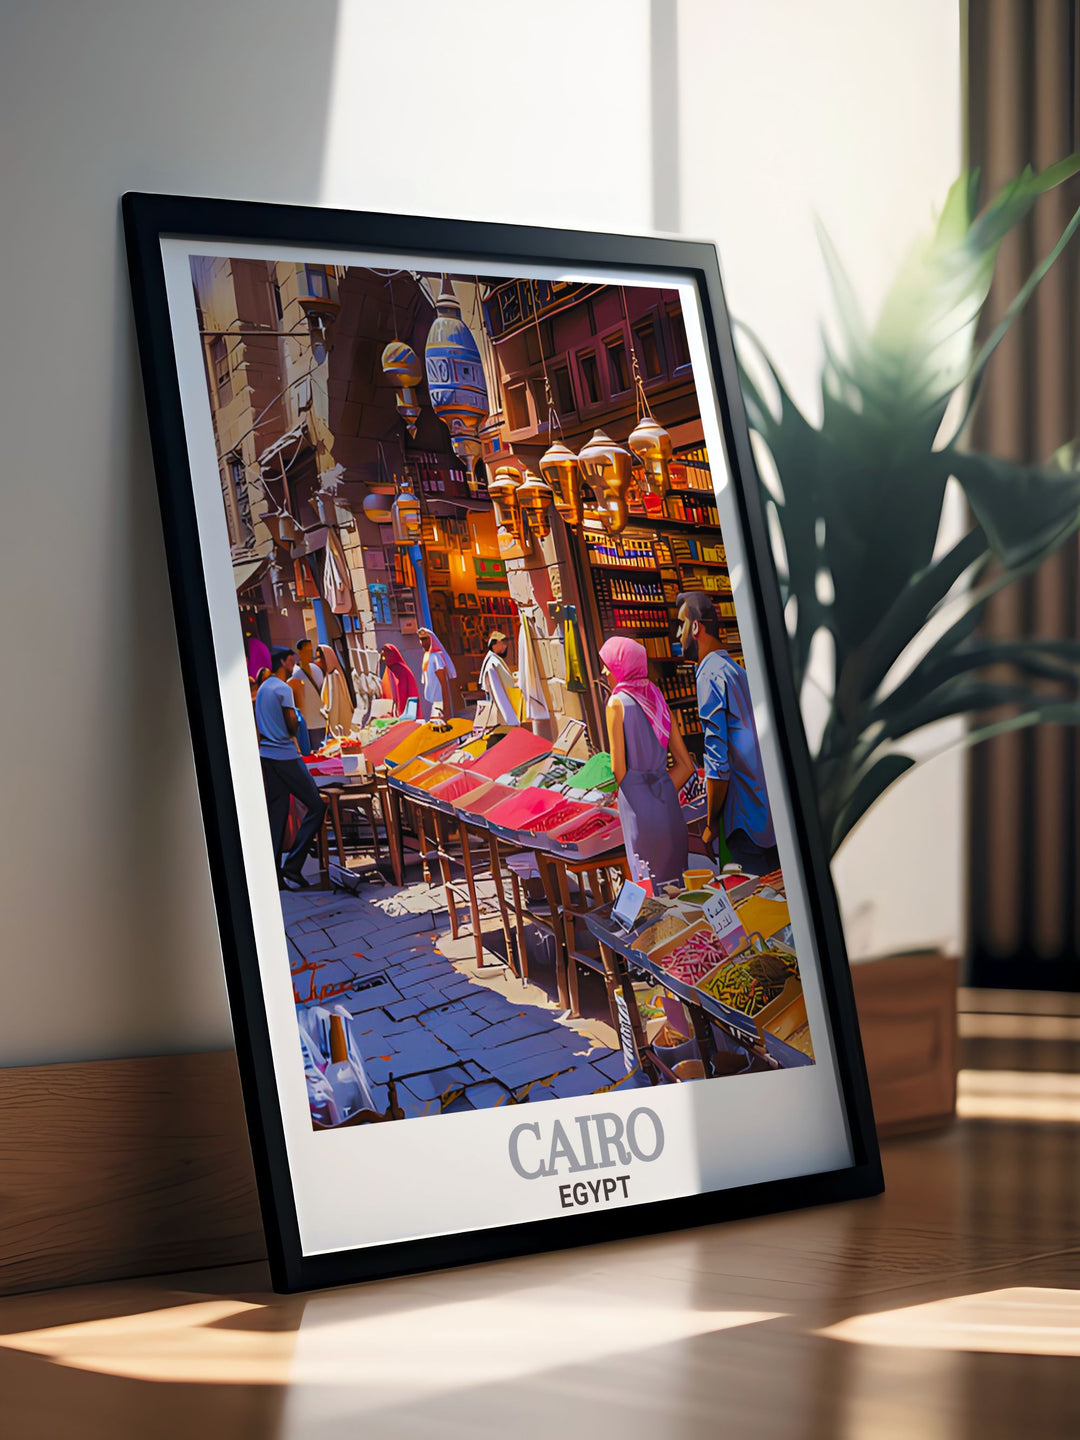 This beautiful Khan El Khalili Bazaar poster showcases the rich history and bustling energy of Cairo making it a great addition to any art collection and a thoughtful personalized gift for any occasion